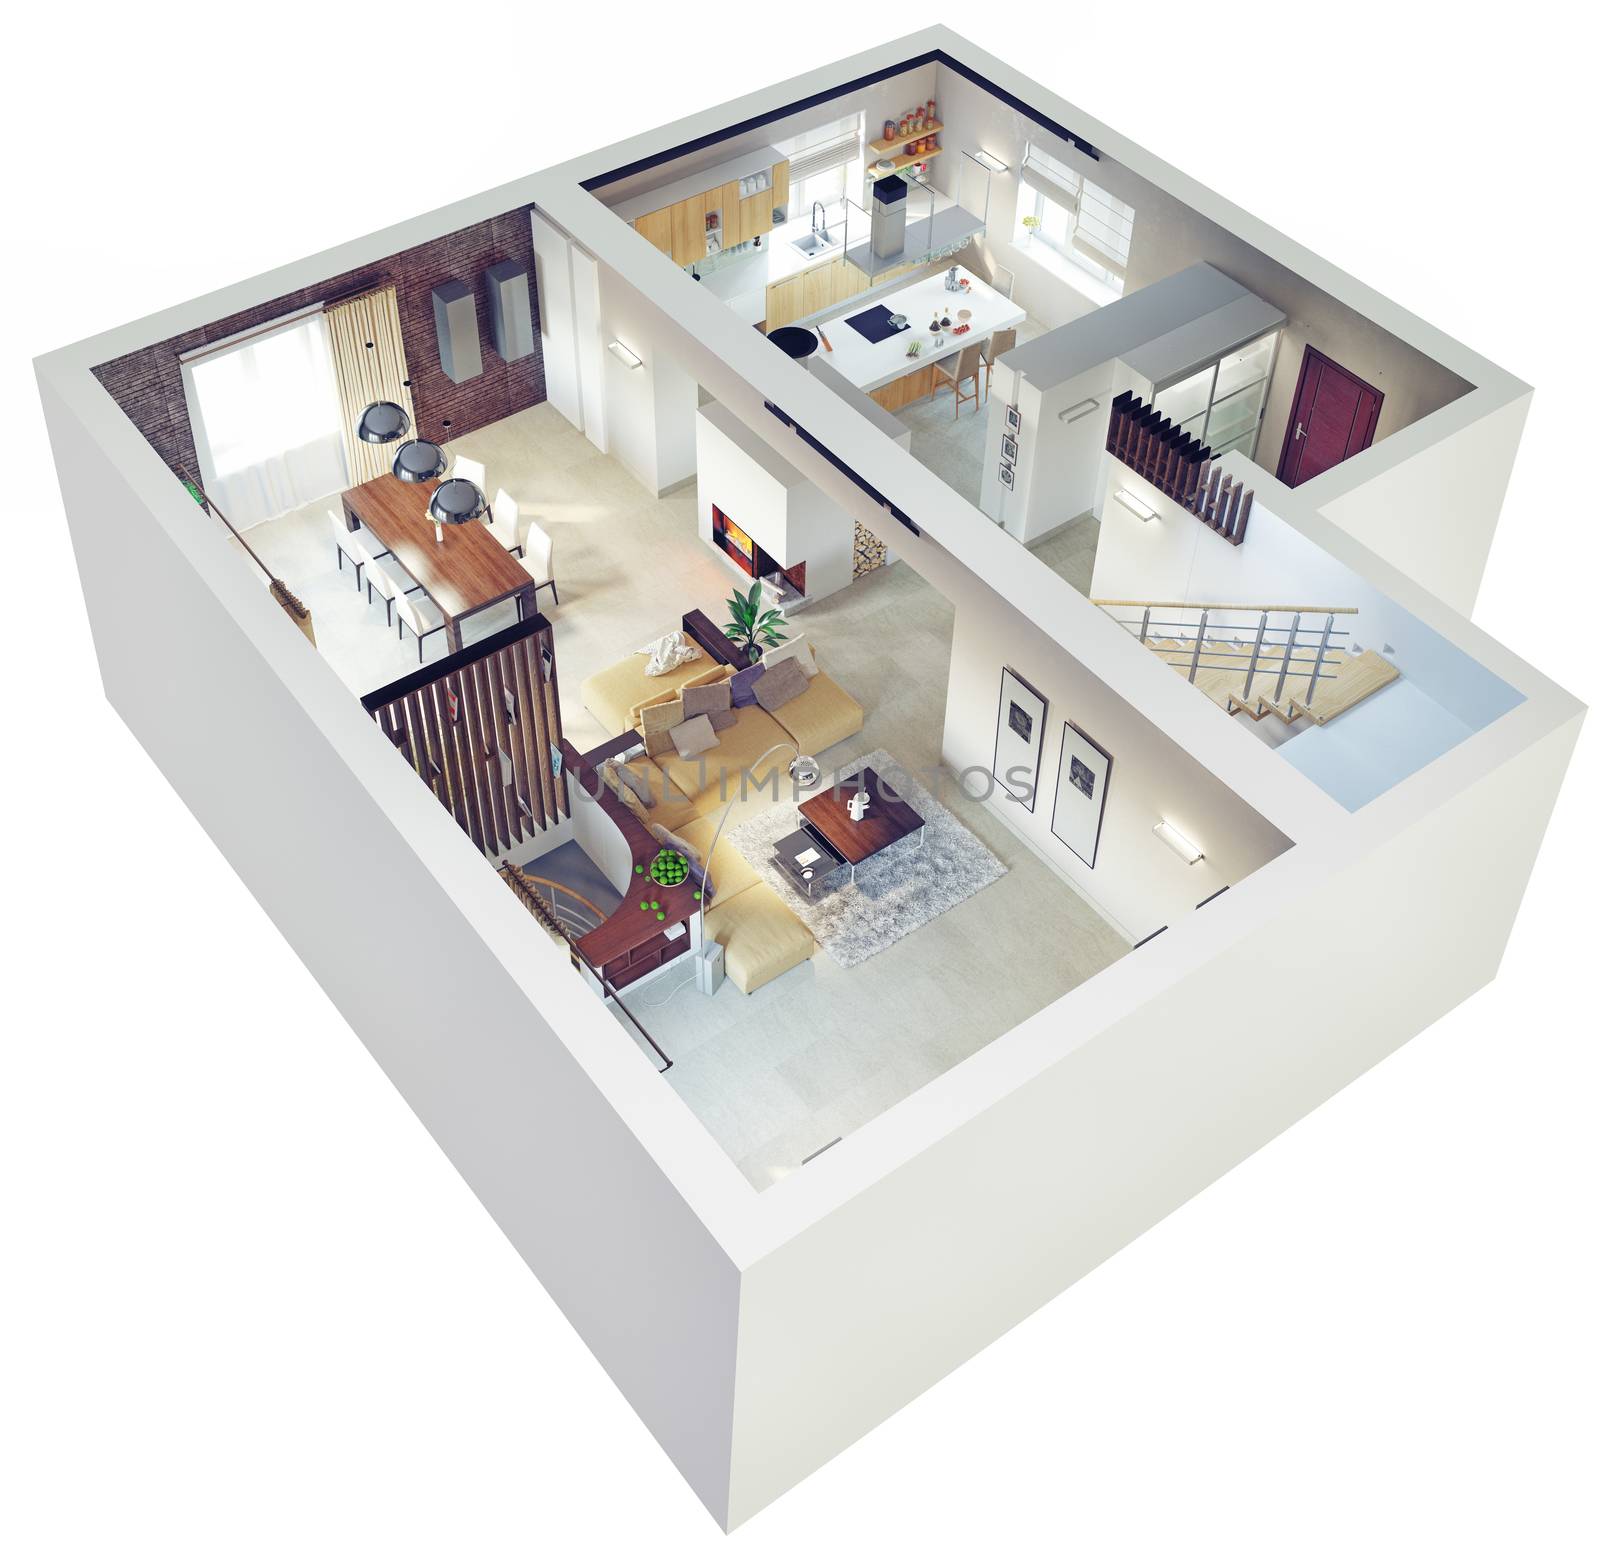 Plan view of an apartment by vicnt